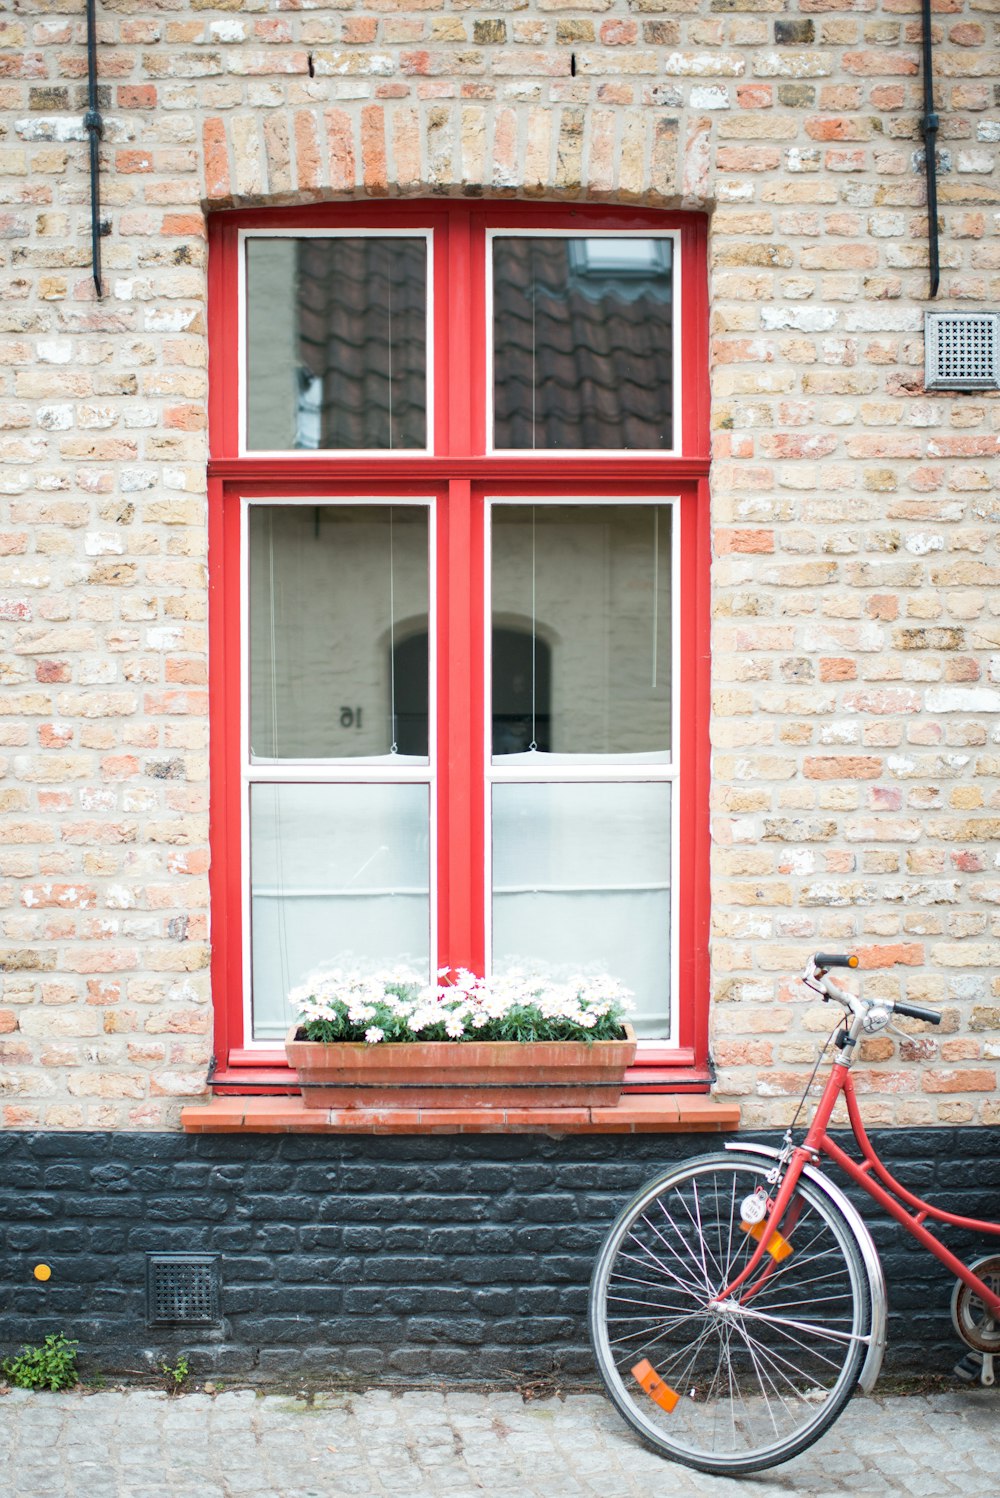 red and white wooden framed window with potted flowers